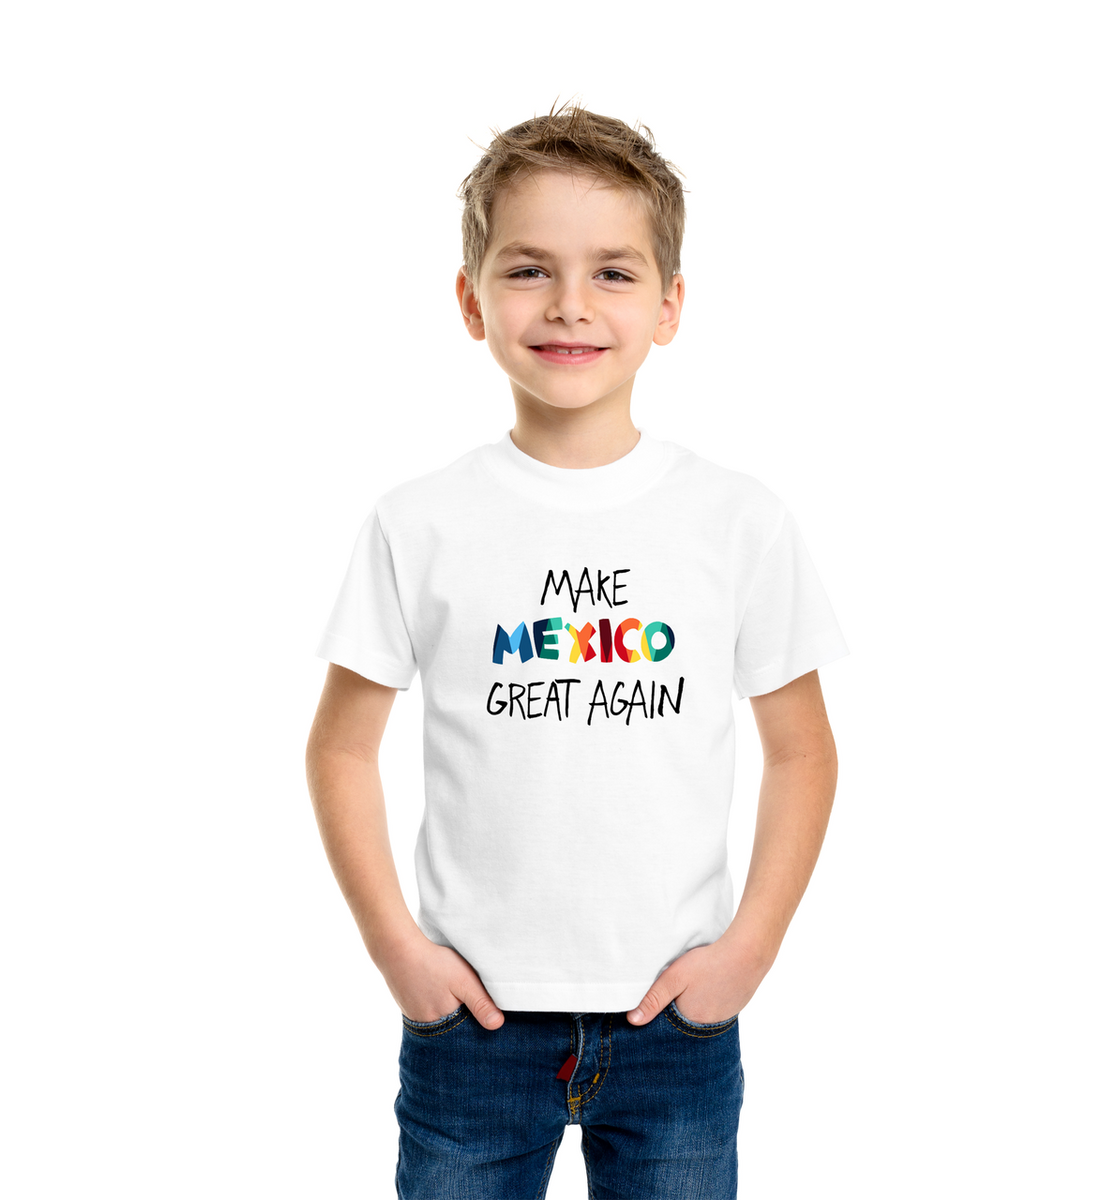 MEXICO AGAIN UNISEX T SHIRT - WE ARE ONE BY JAFF